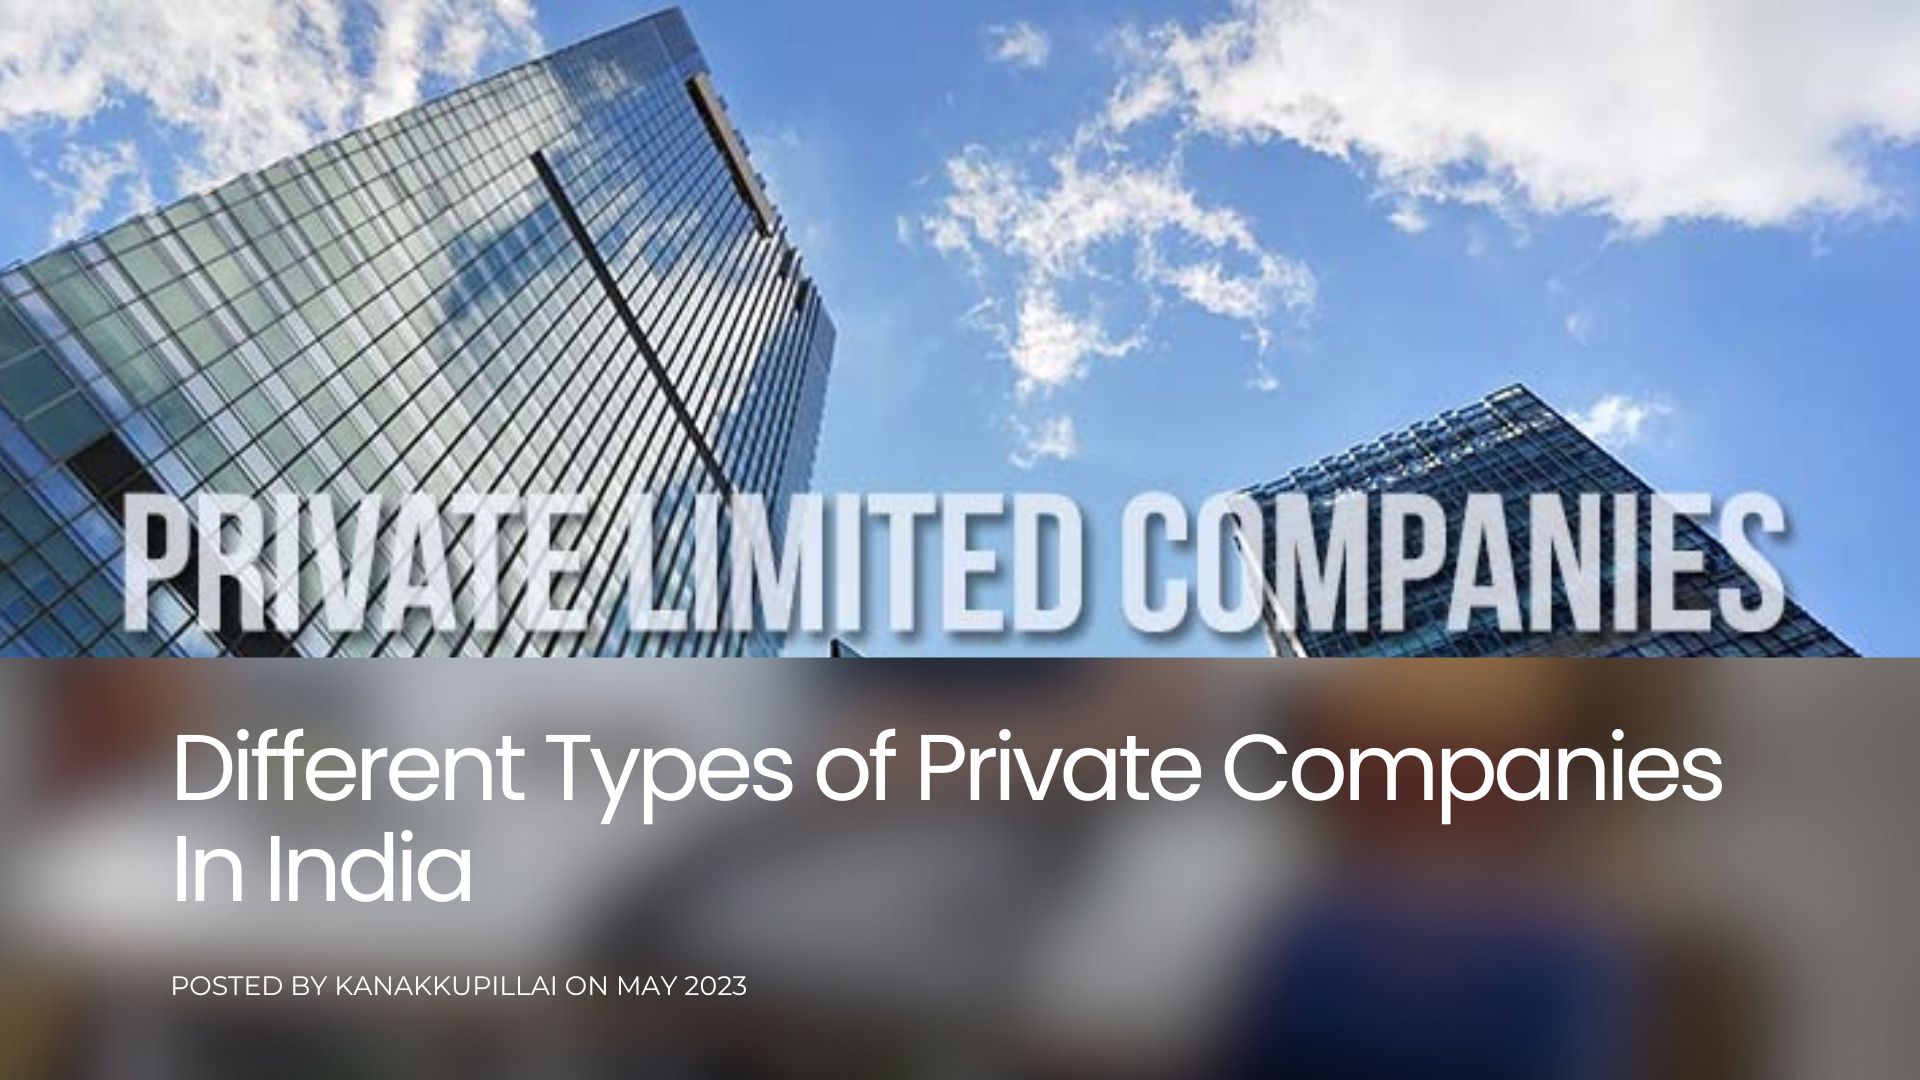 Different Types of Private Companies in India